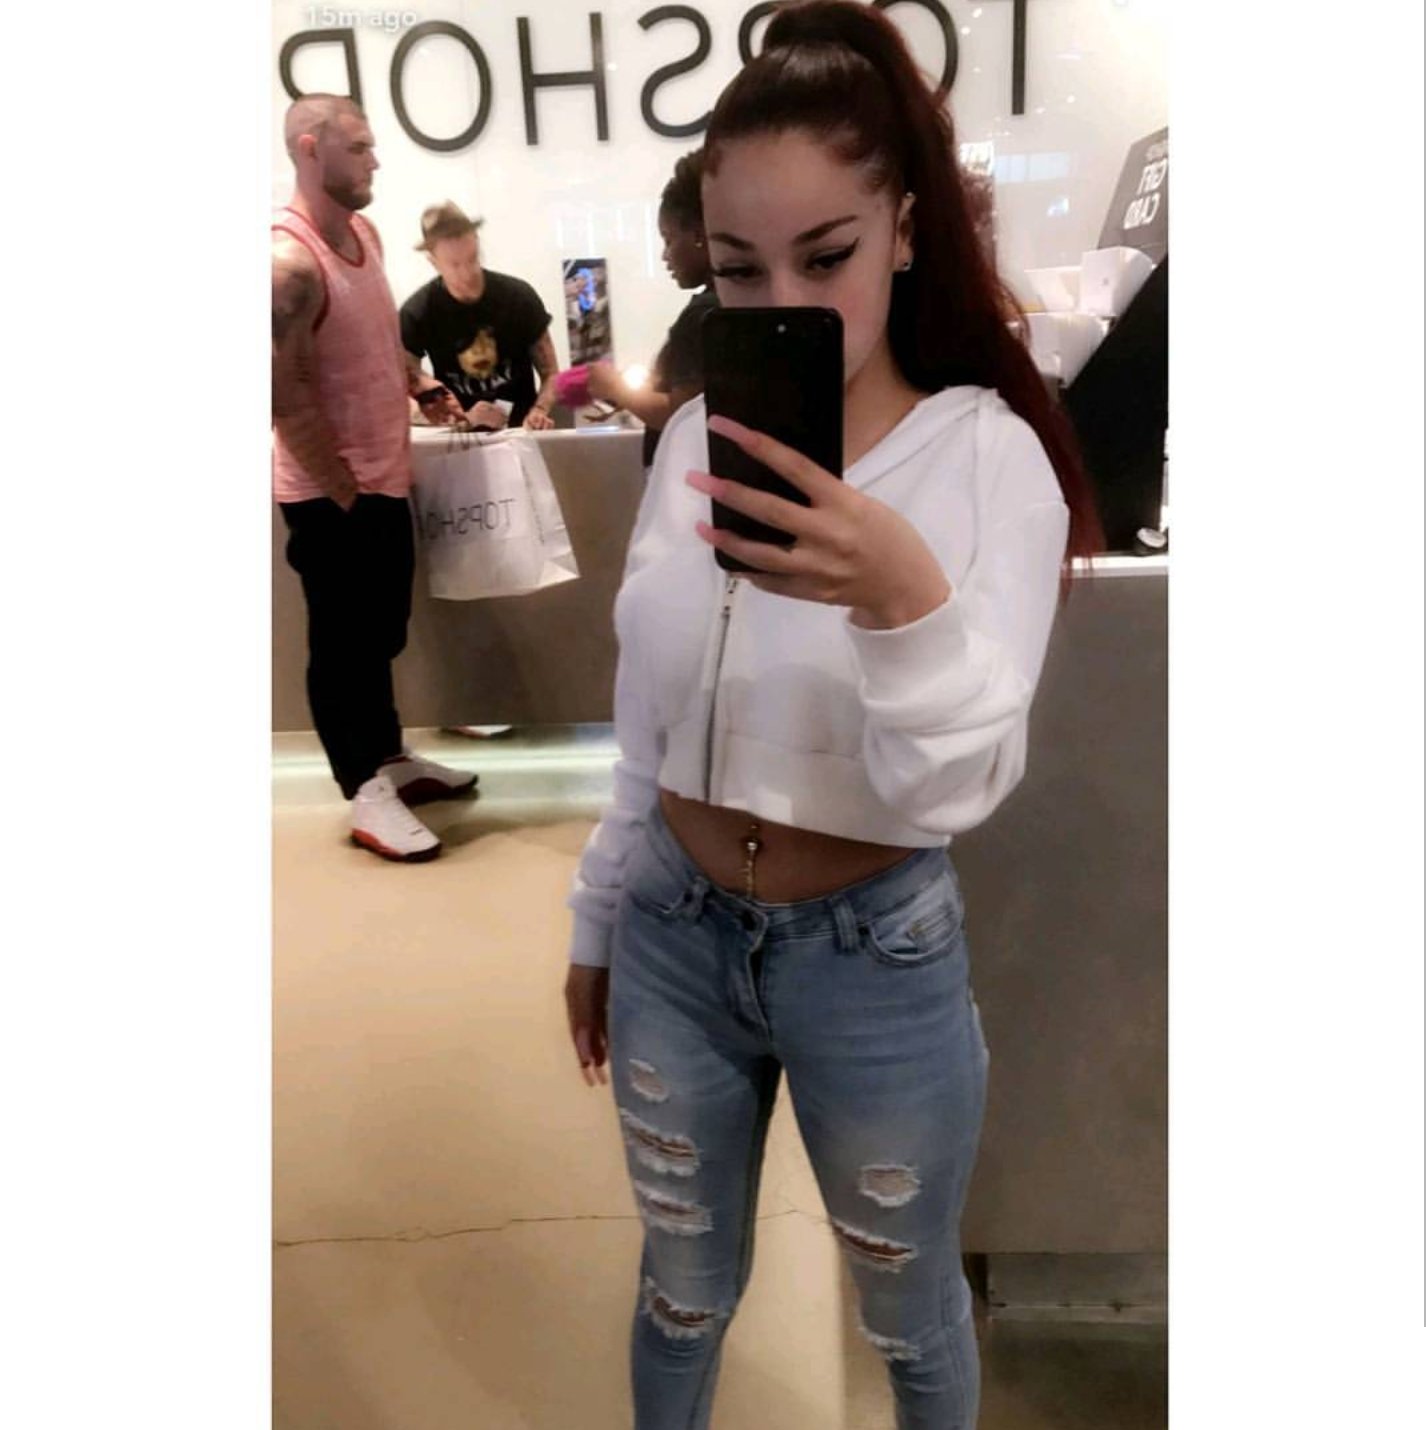 What Is Danielle Bregoli's Snapchat? Plus, More About Facts About Her!